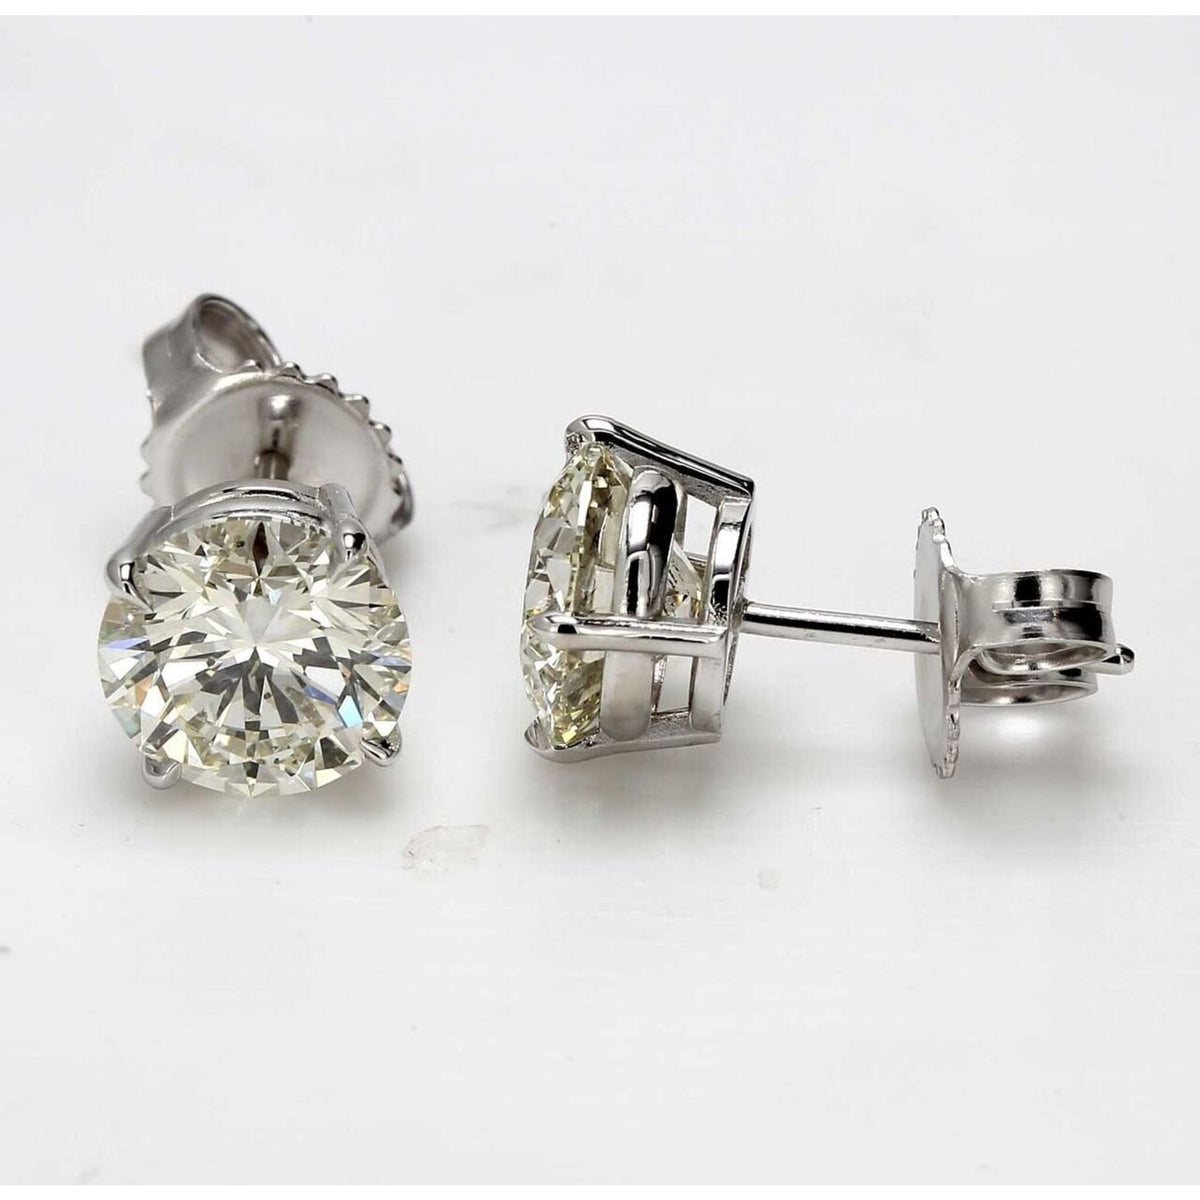 Types of Earrings' Backs  10 Types You Should Know About – Robinson's  Jewelers